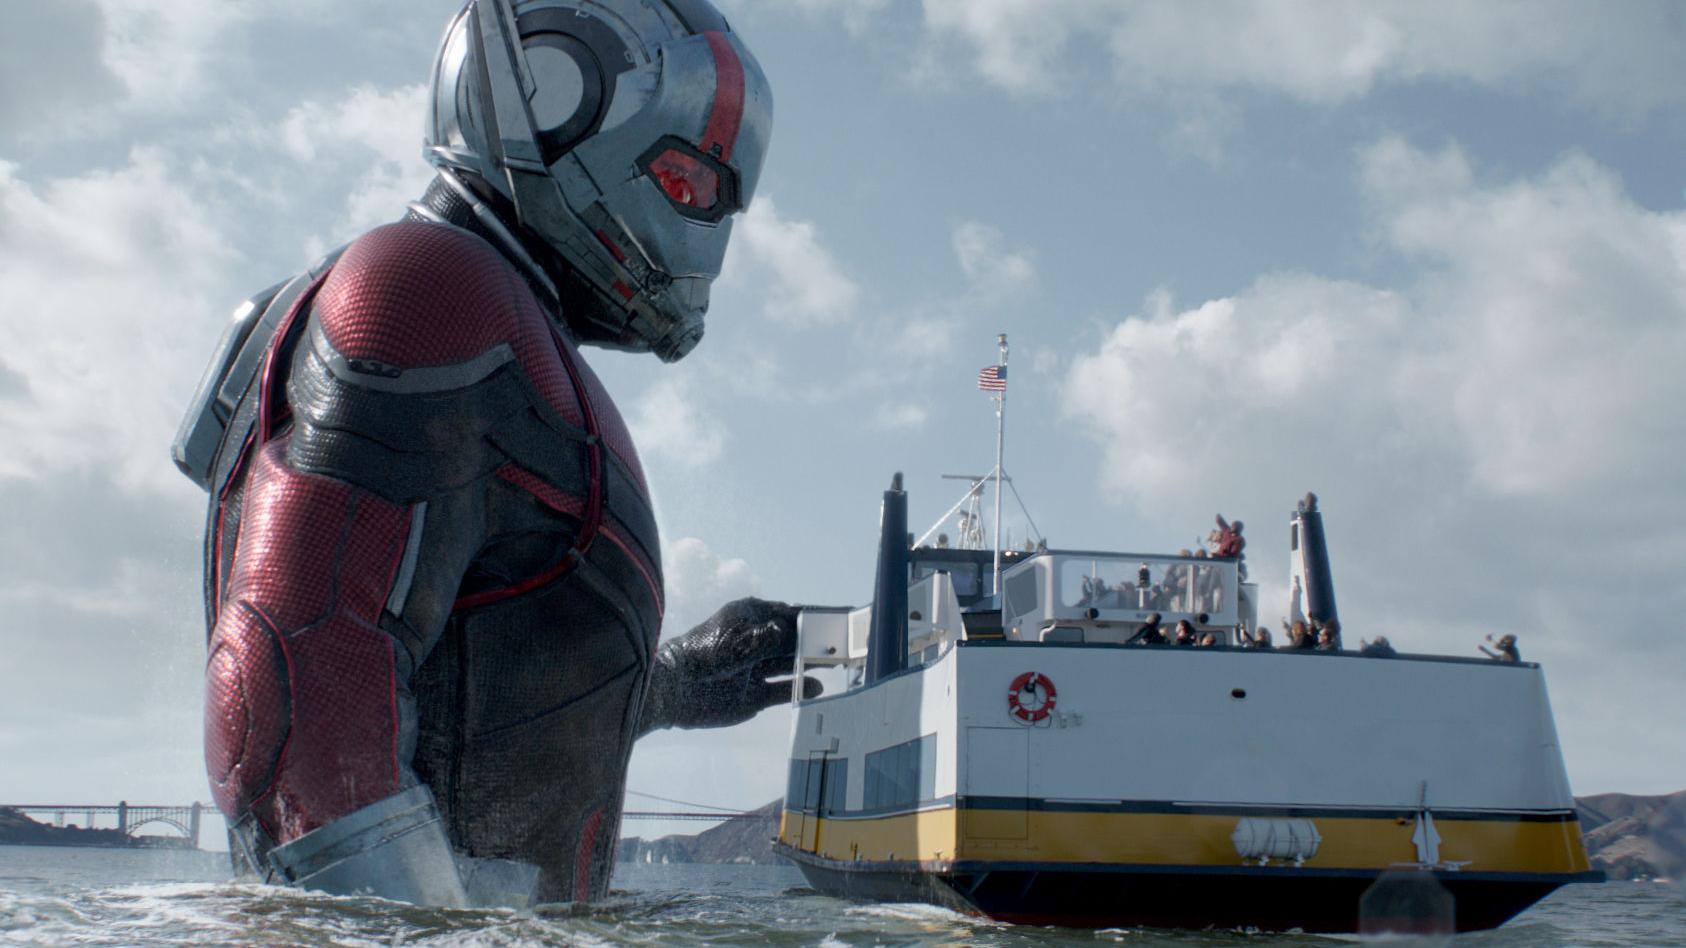 Ant-Man and the Wasp': What parents need to know | Entertainment | buffalonews.com